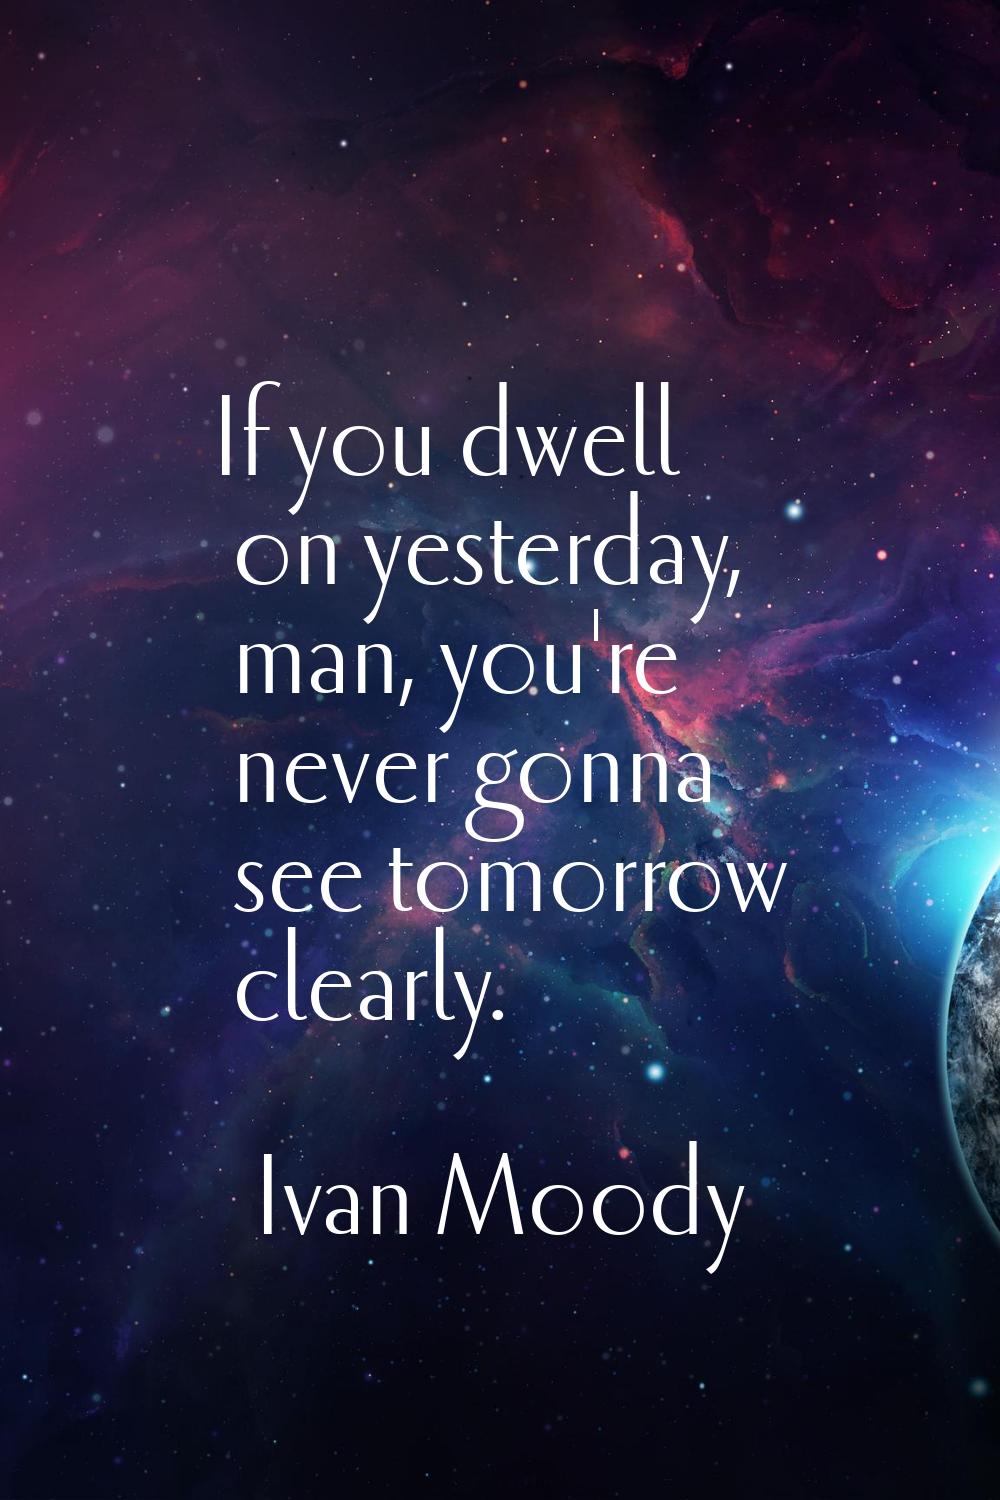 If you dwell on yesterday, man, you're never gonna see tomorrow clearly.